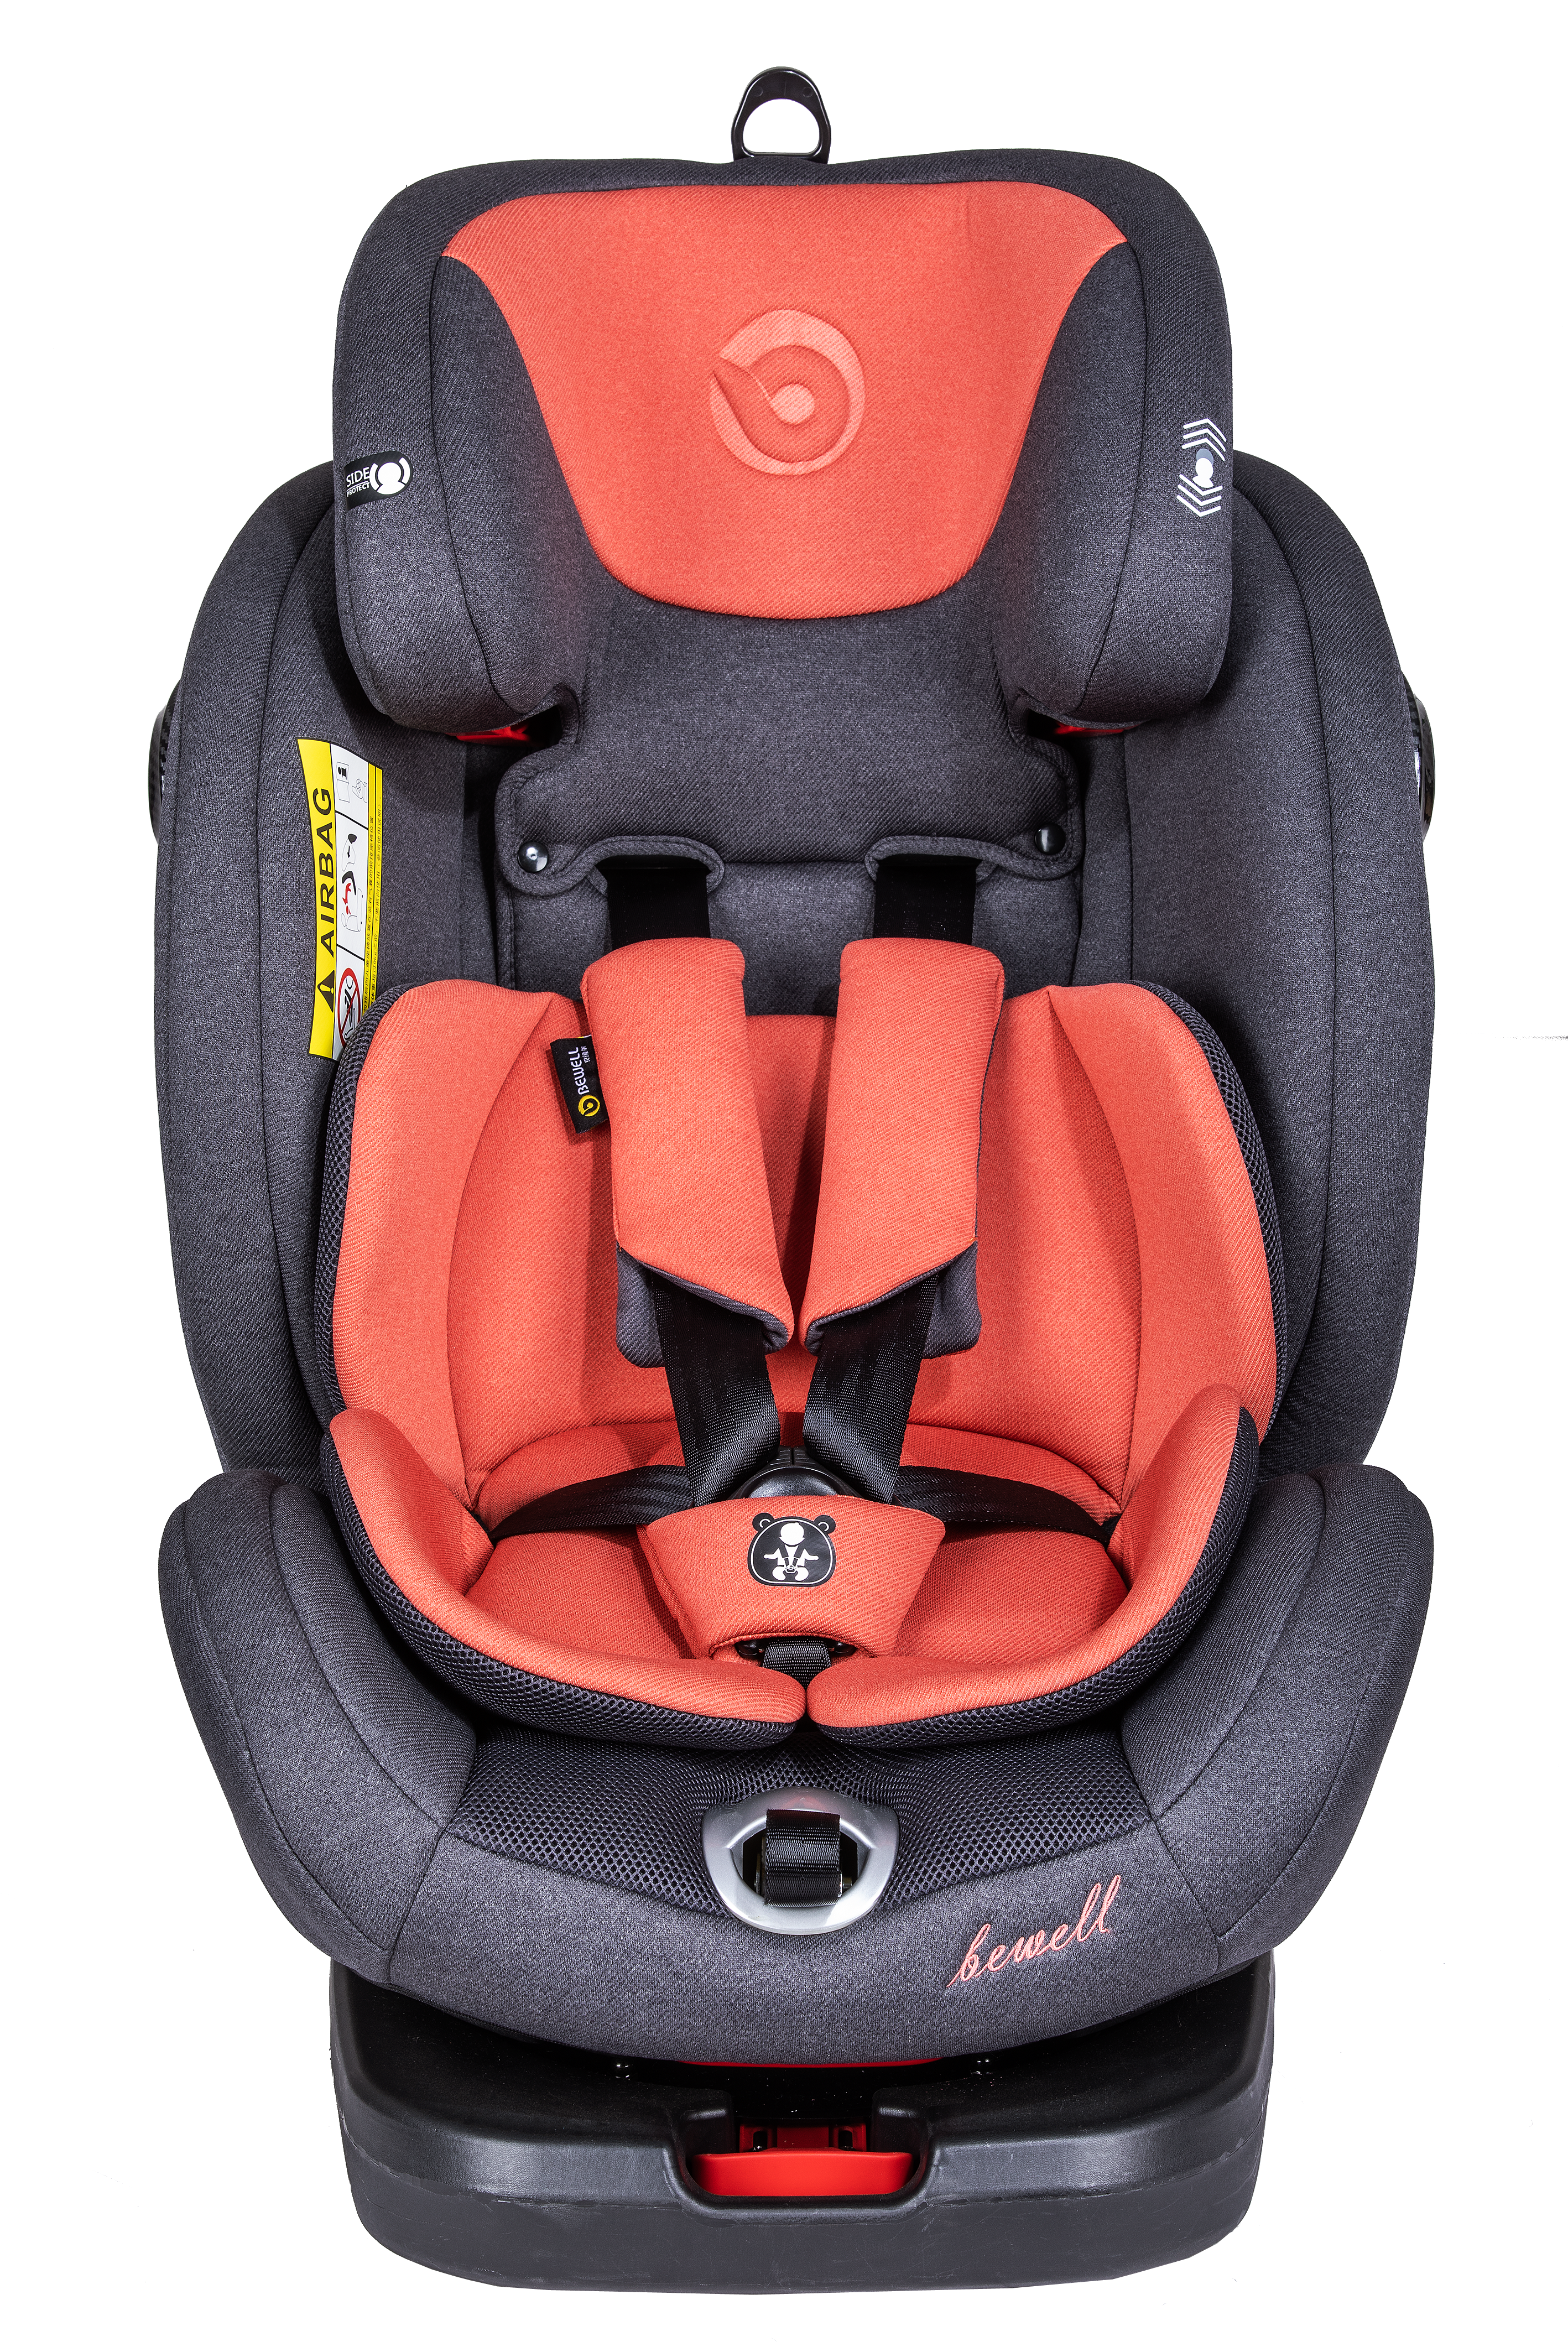 Steel-Framed Structure Portable 12 Year Old Baby Car Seat